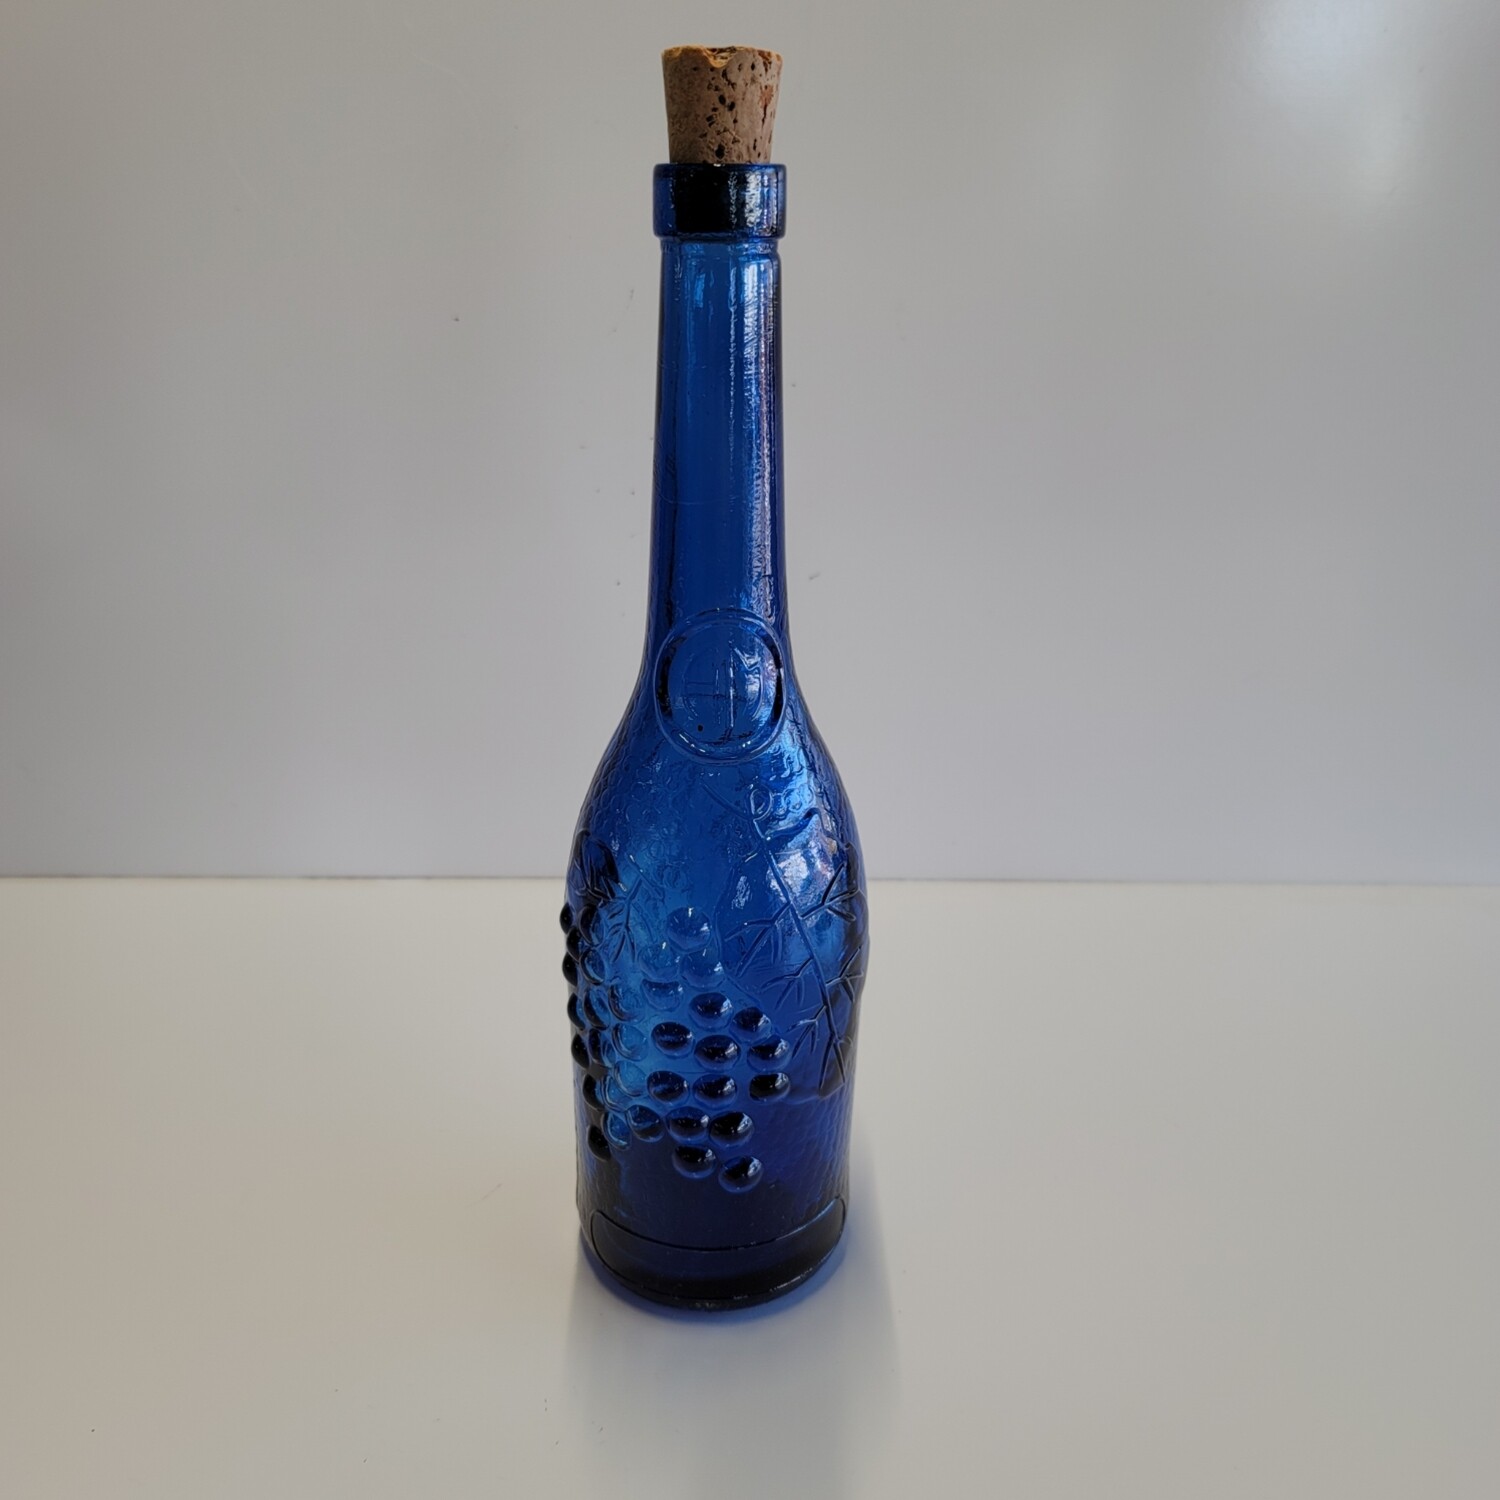 Decorative AM Blue Wine Bottle with Grapes & Leaves